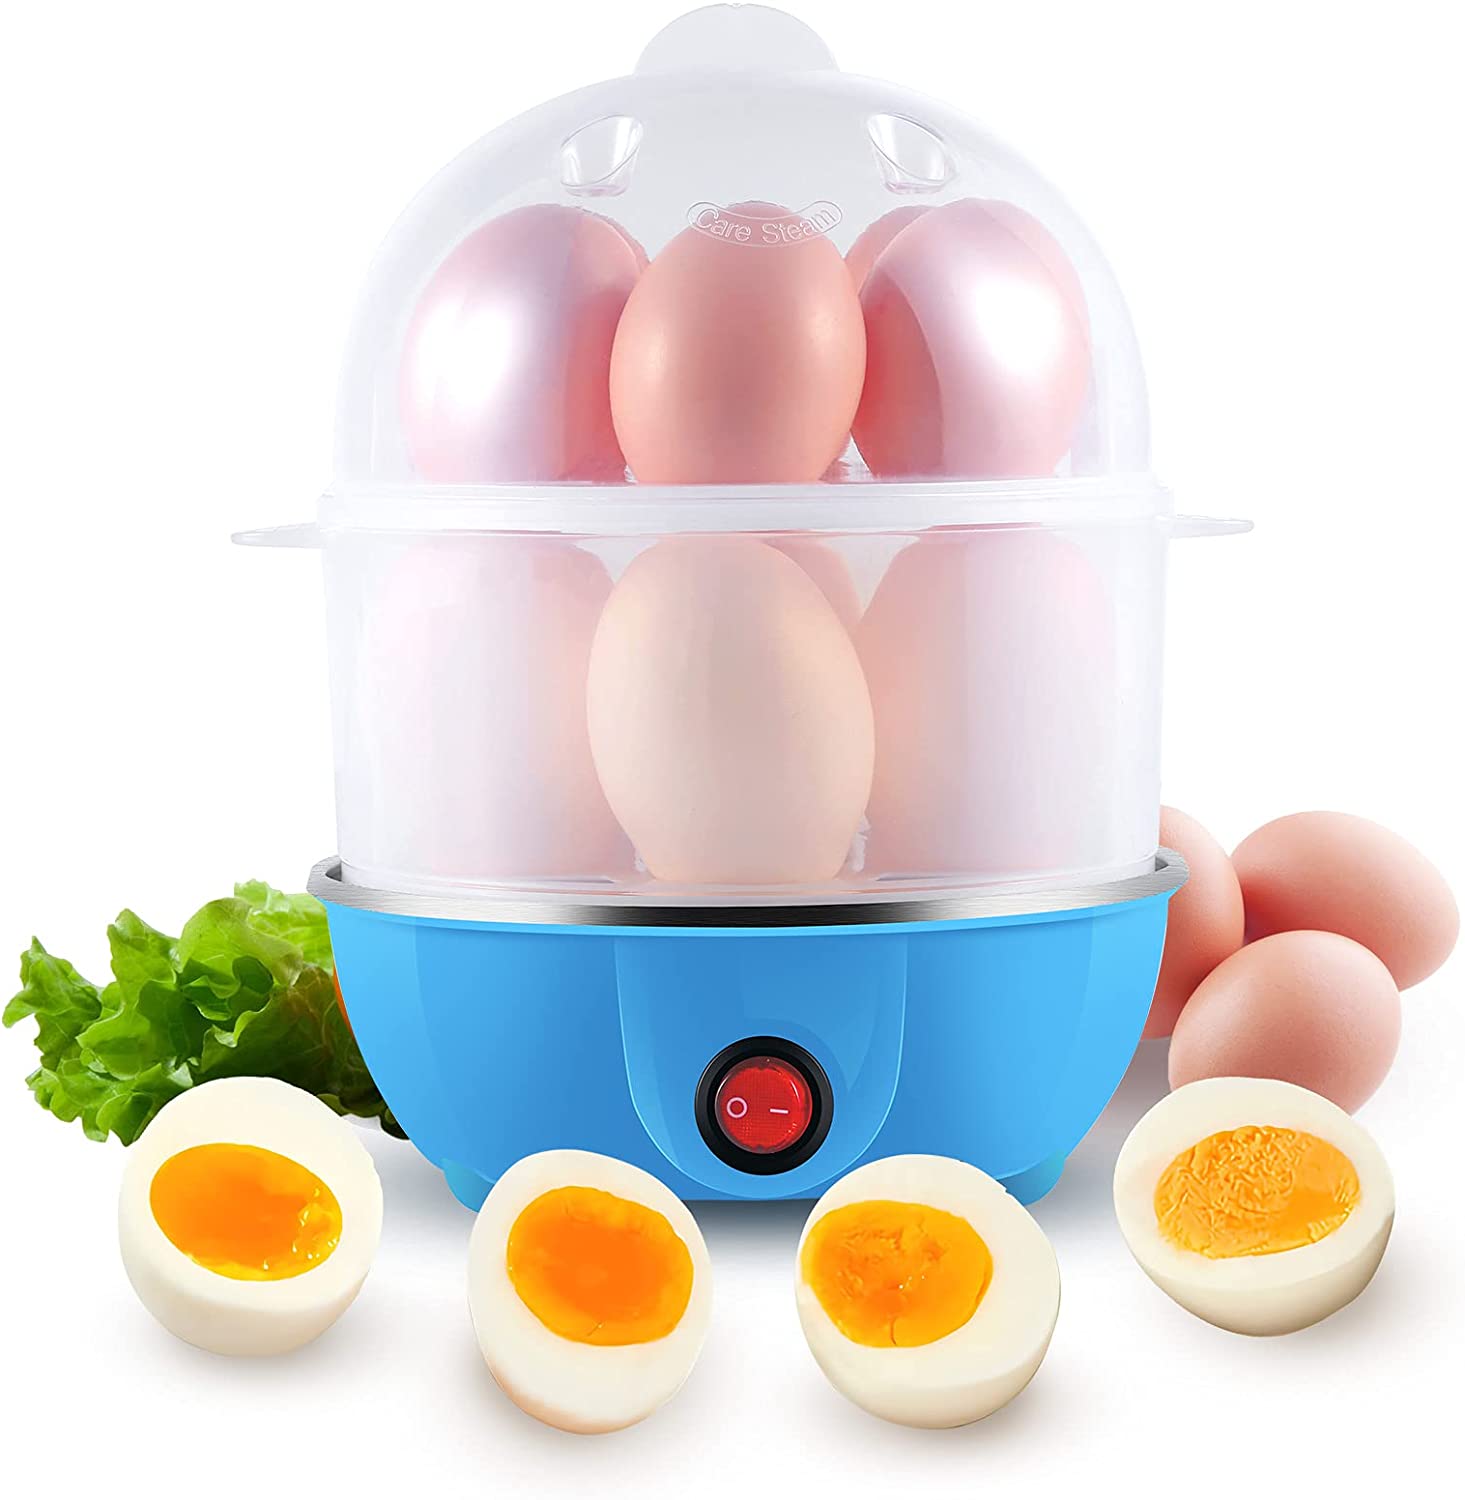 Uten Electric egg cooker test winner, 350 W egg head for 12 eggs, double egg cooker with egg cup, with stainless steel shell, BPA-free, heating protection, with indicator light [energy class A+]